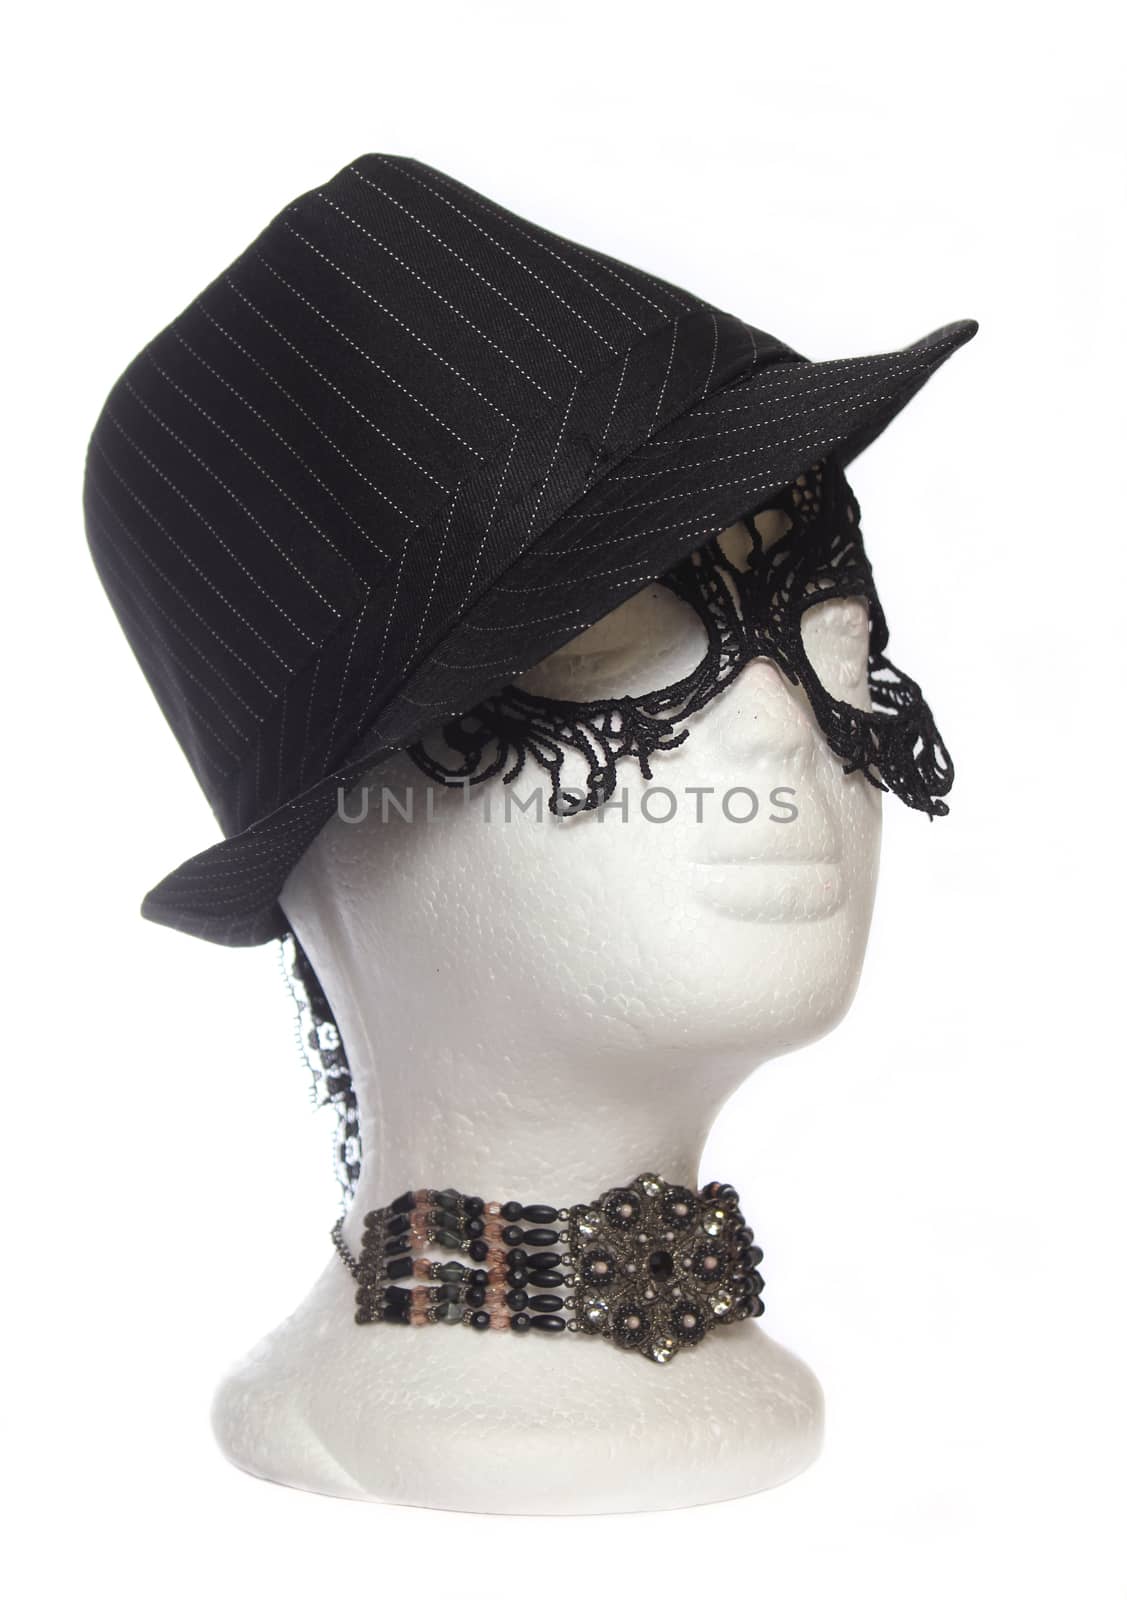 Fedora and Lace Mask on Mannequin Head With Antique Choker Necklace